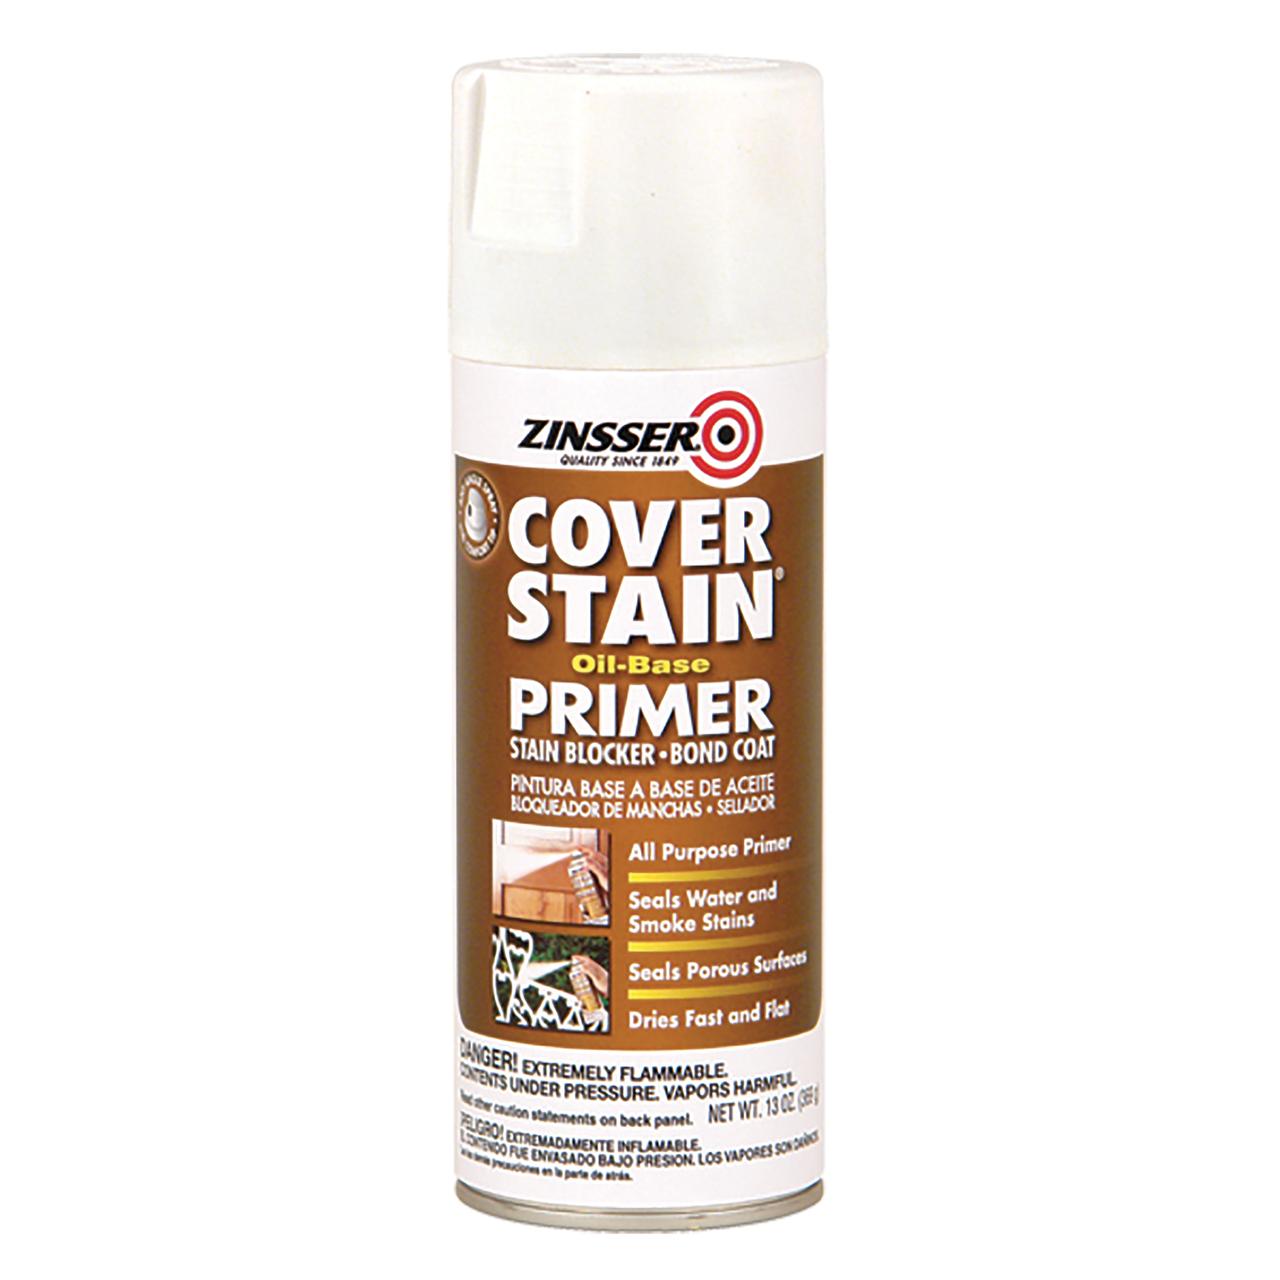 White, Zinsser Cover Stain Flat Oil-Based Interior and Exterior Primer and Sealer Spray-3608, 13 oz - image 2 of 10